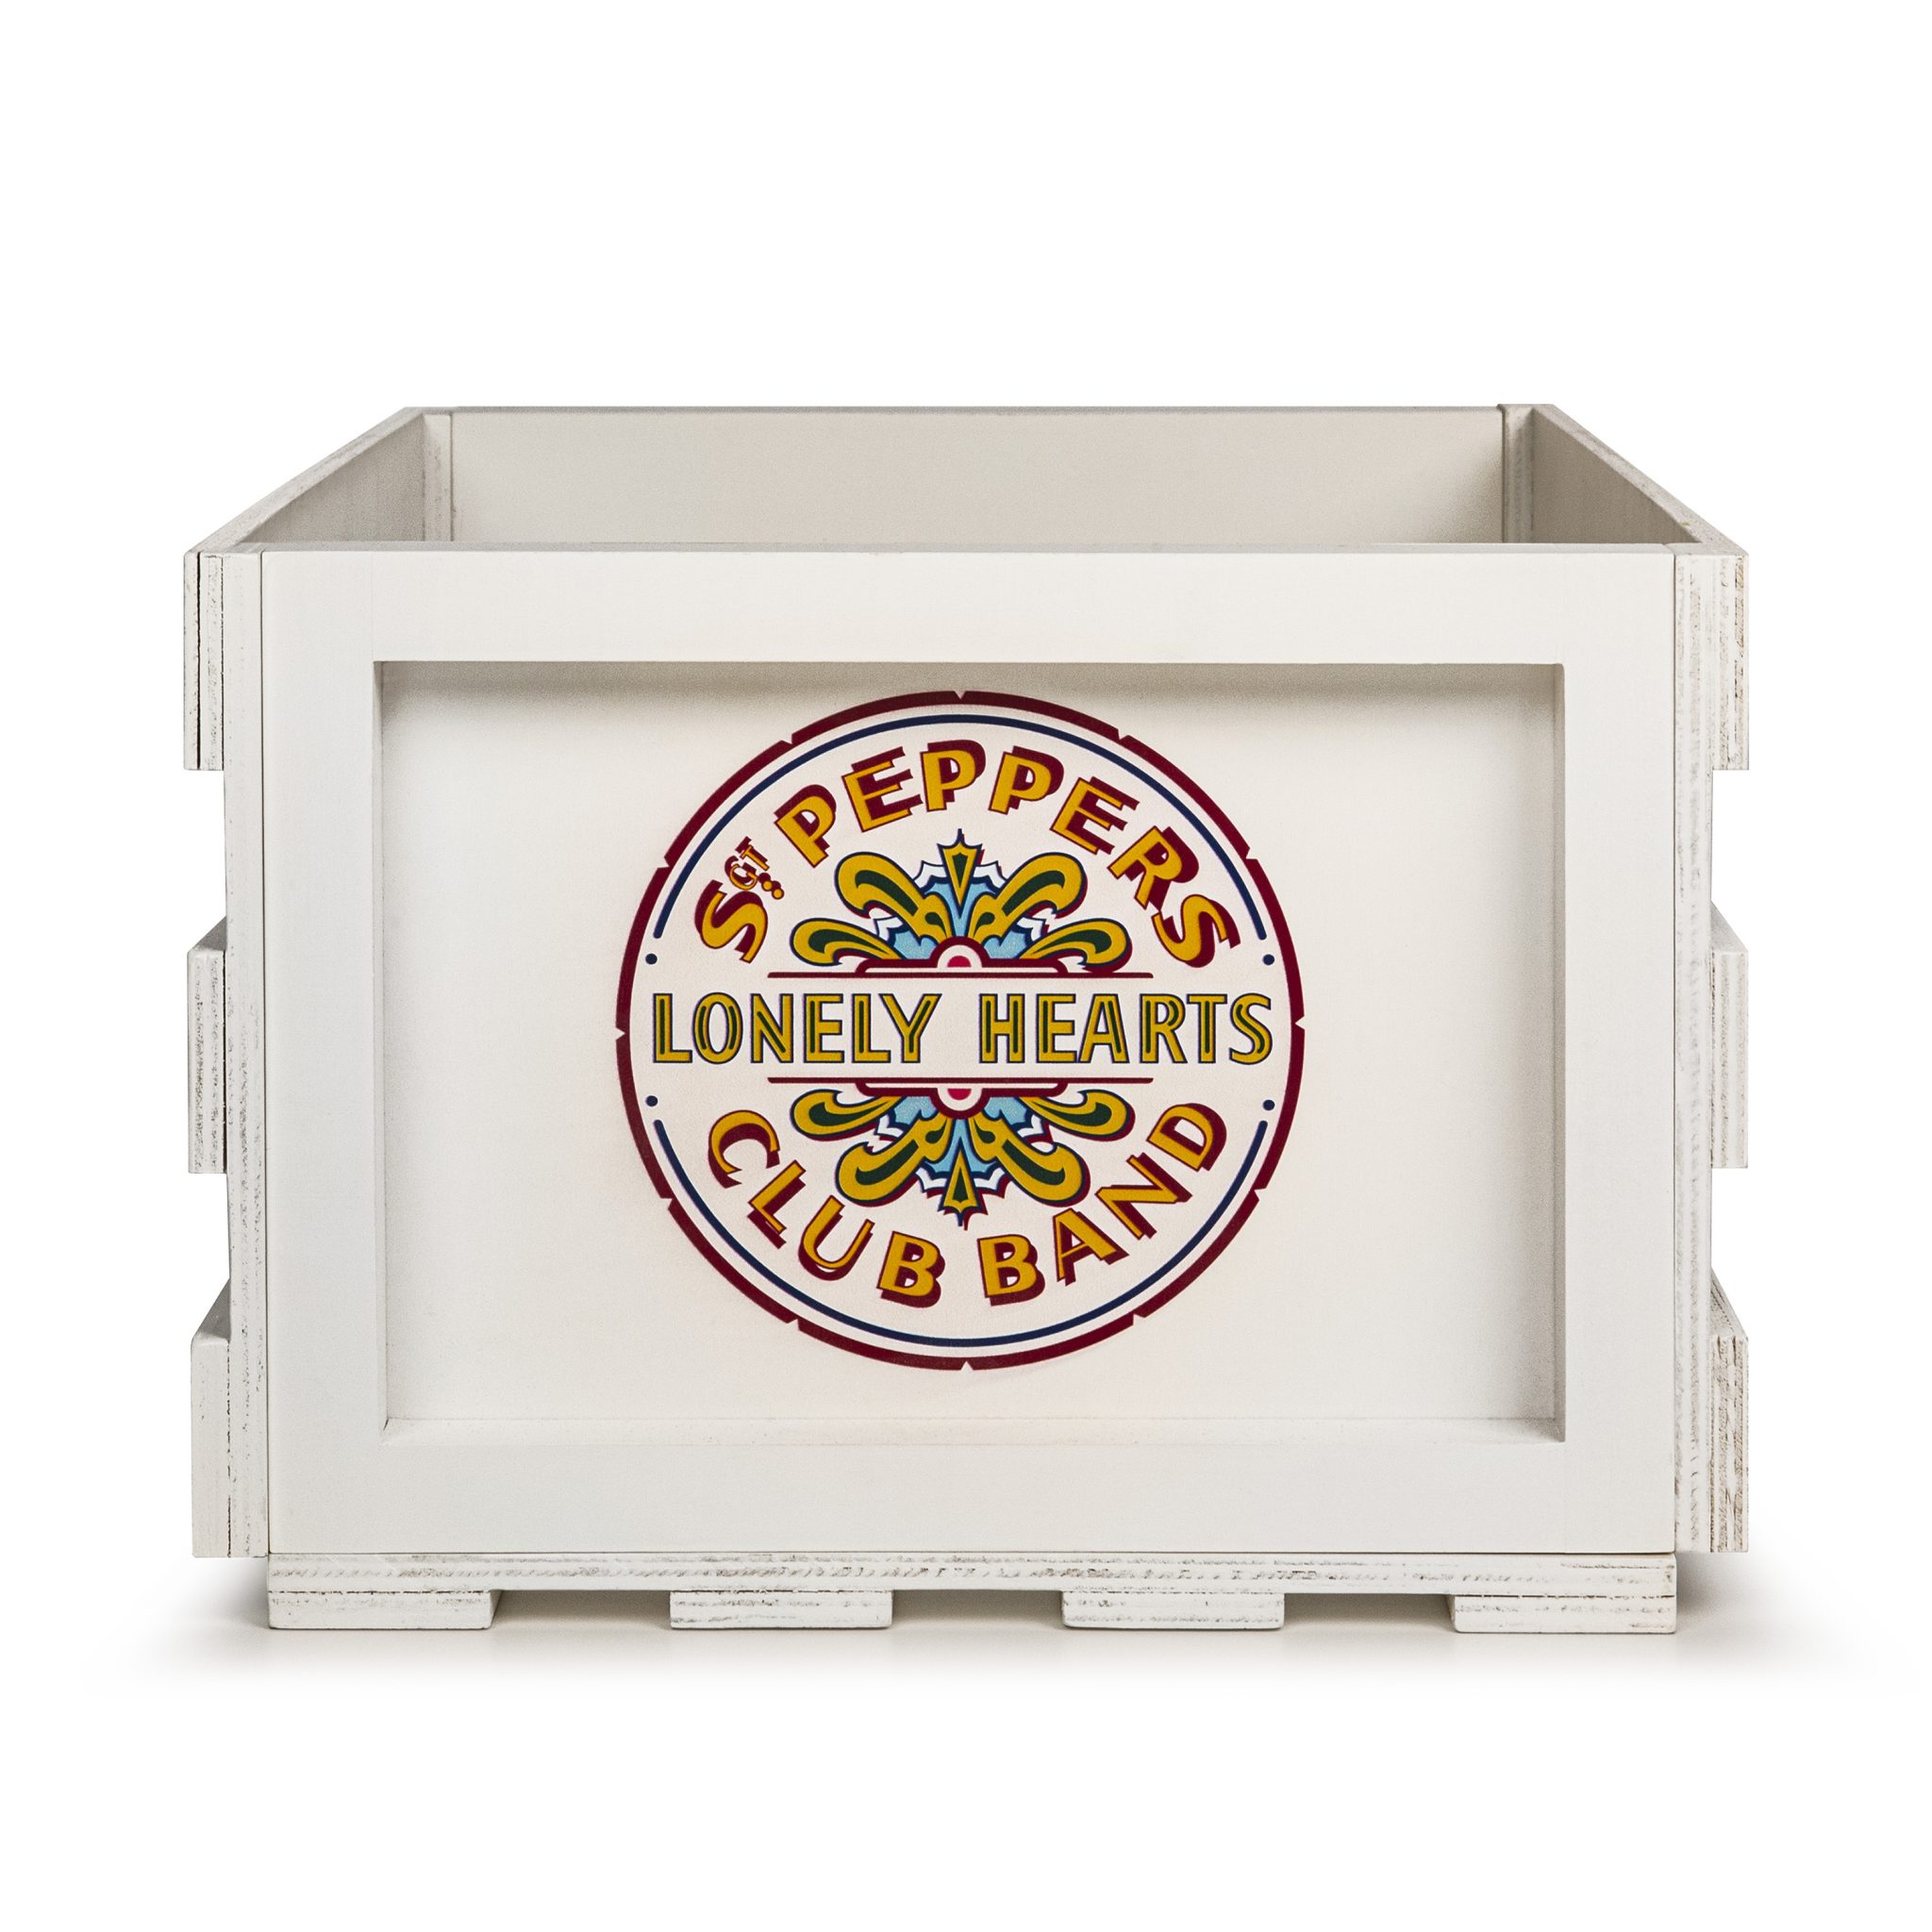 Crosley Radio Renews Beatles License for Additional Branded Products image